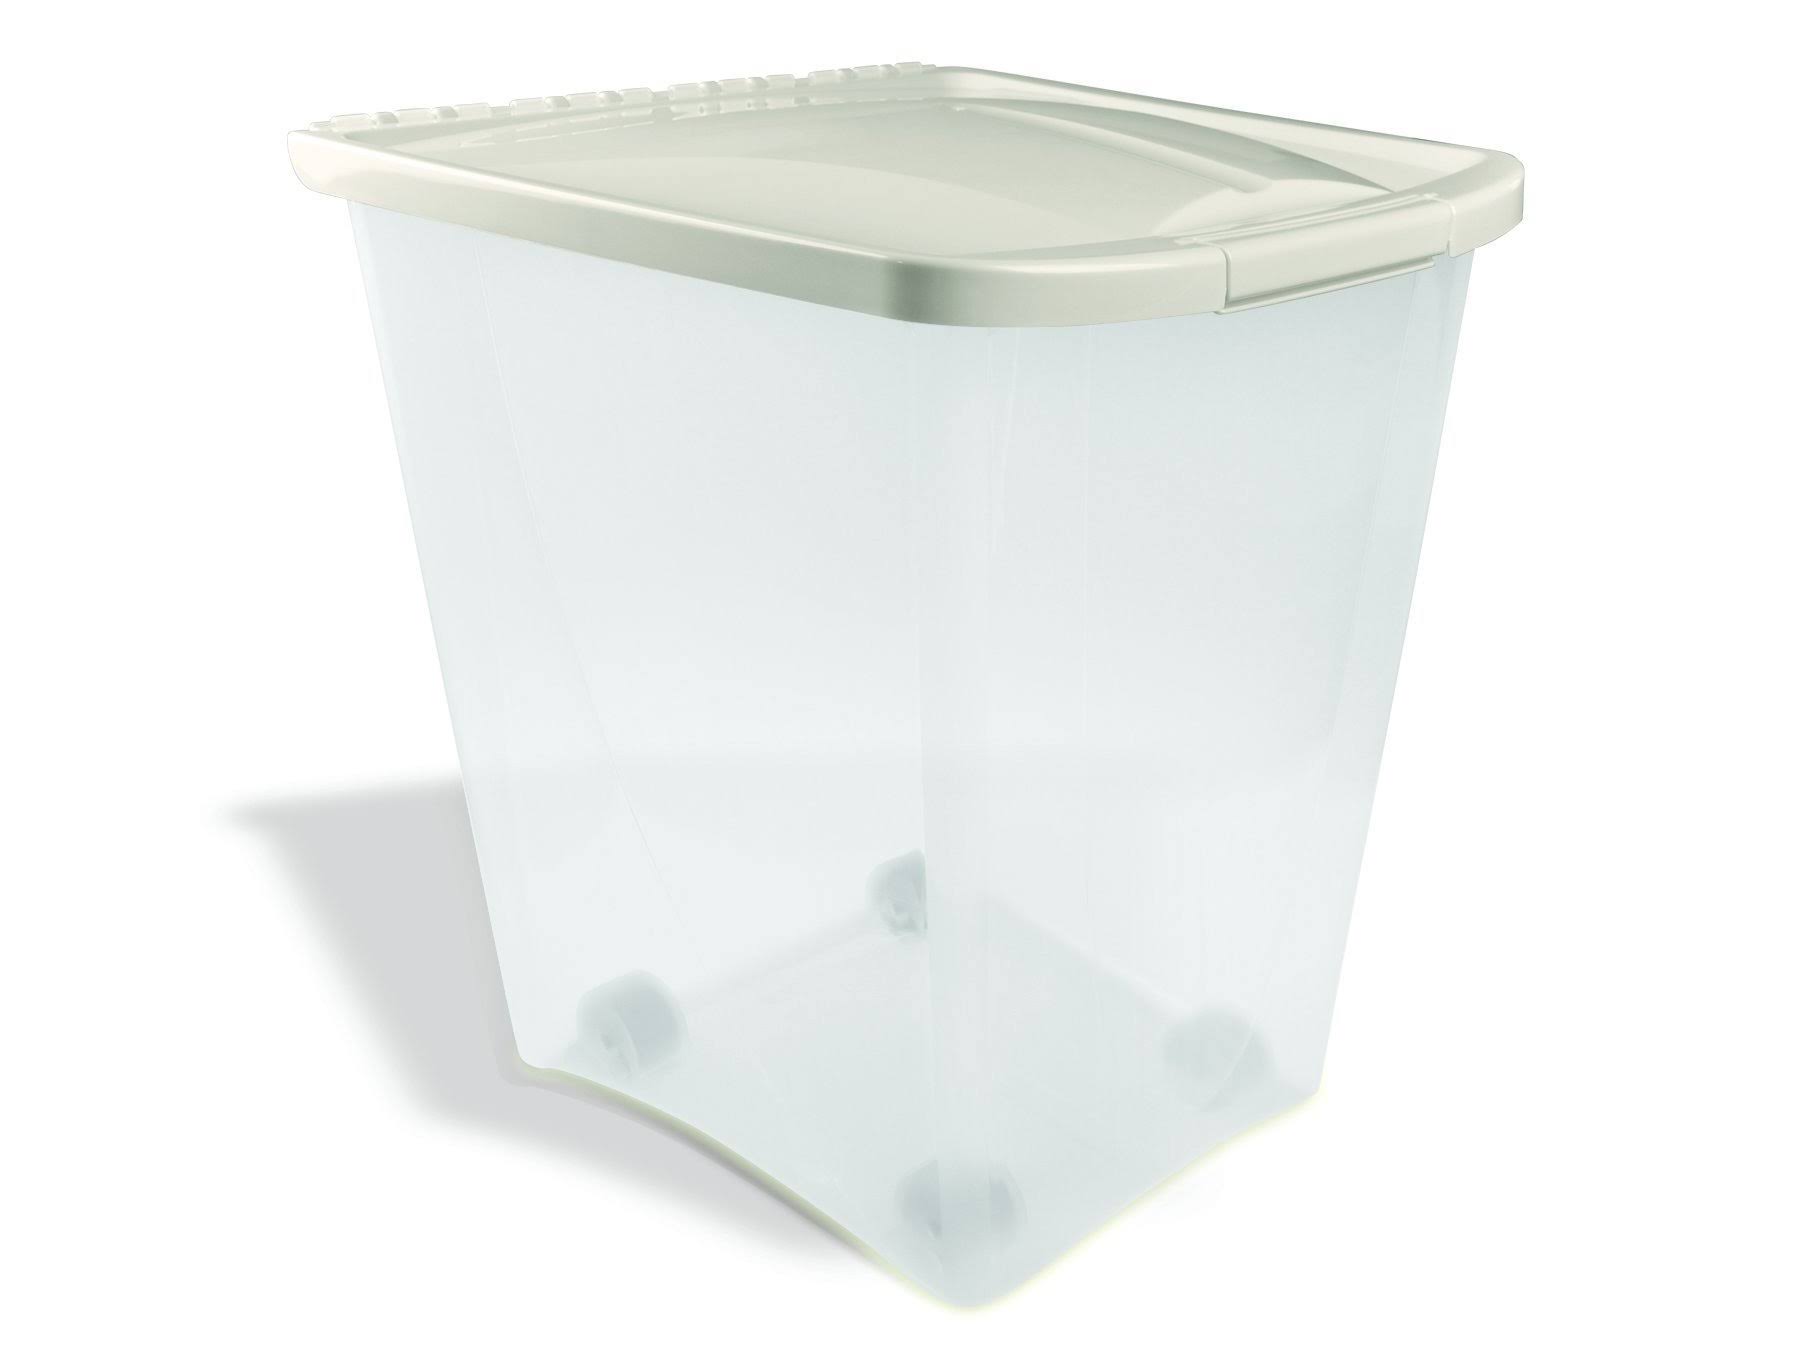 Pureness Food Container - with Wheels, 50lb